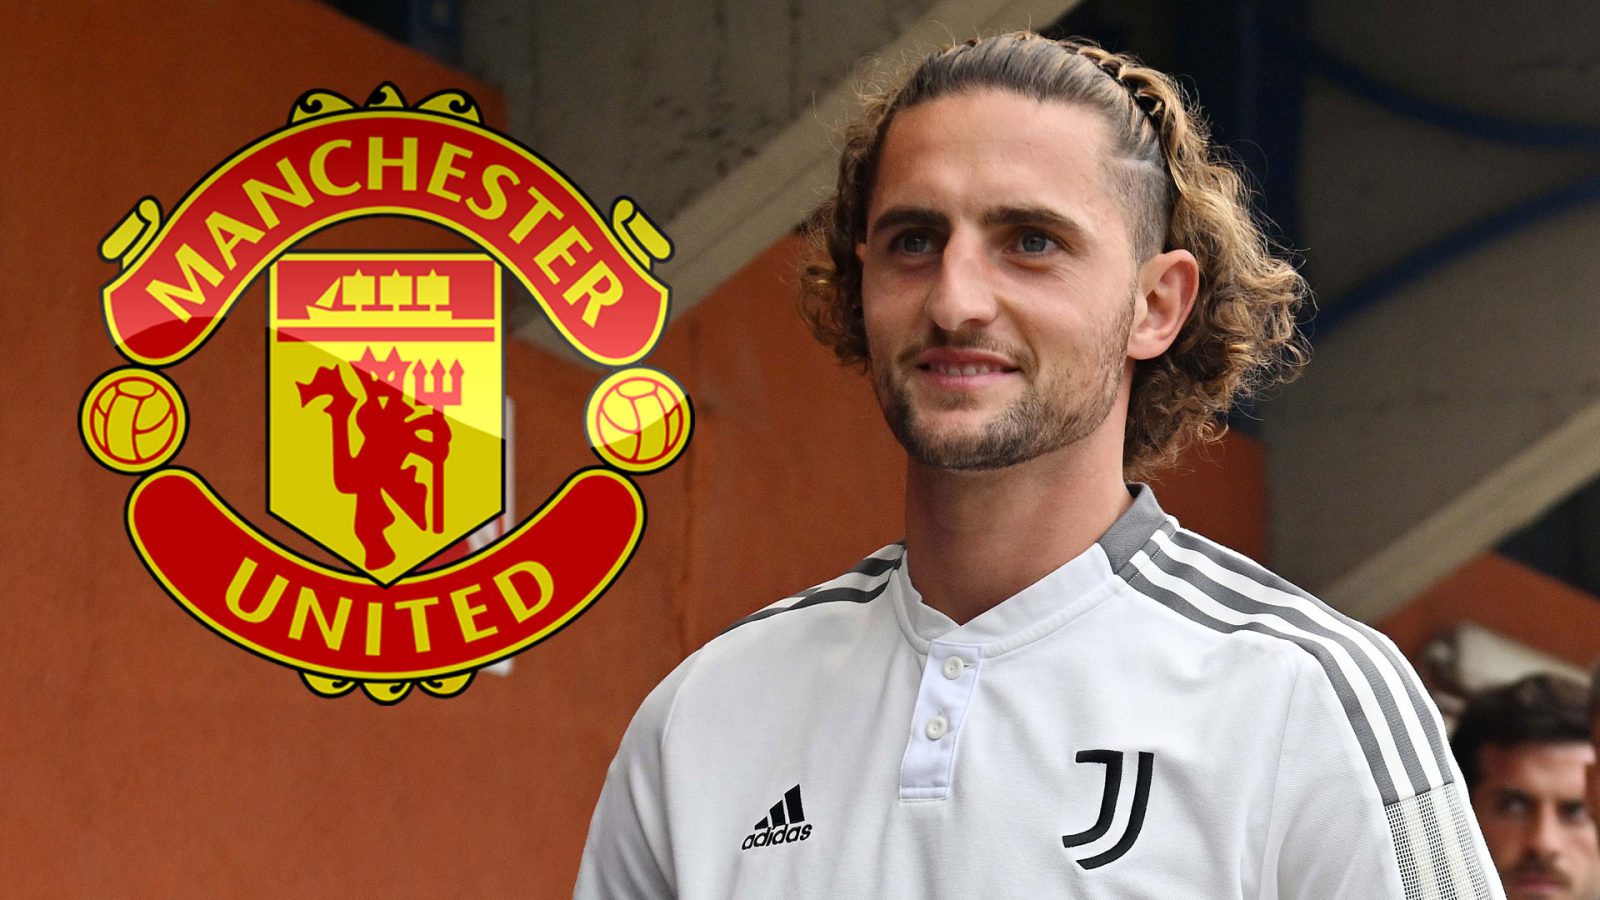 Man United are about to sign Rabiot